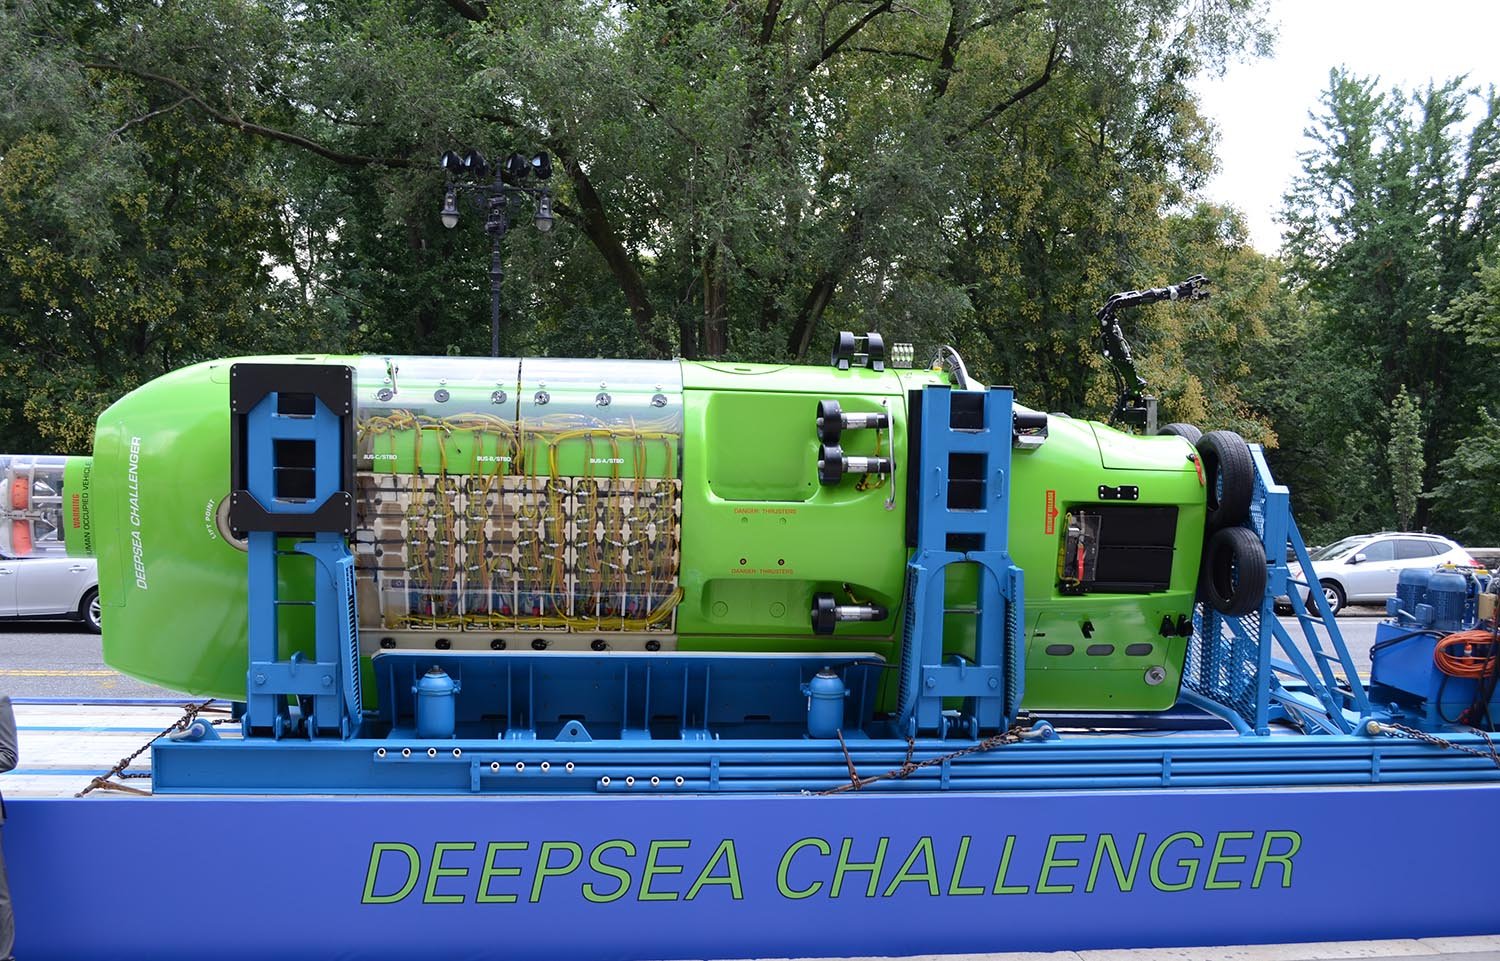 Figure 1: The Deepsea Challenger was able to travel to the deepest known point in the Earth’s seabed thanks to syntactic foams. (Source: Dr. Nikhil Gupta, NYU Tandon School of Engineering)